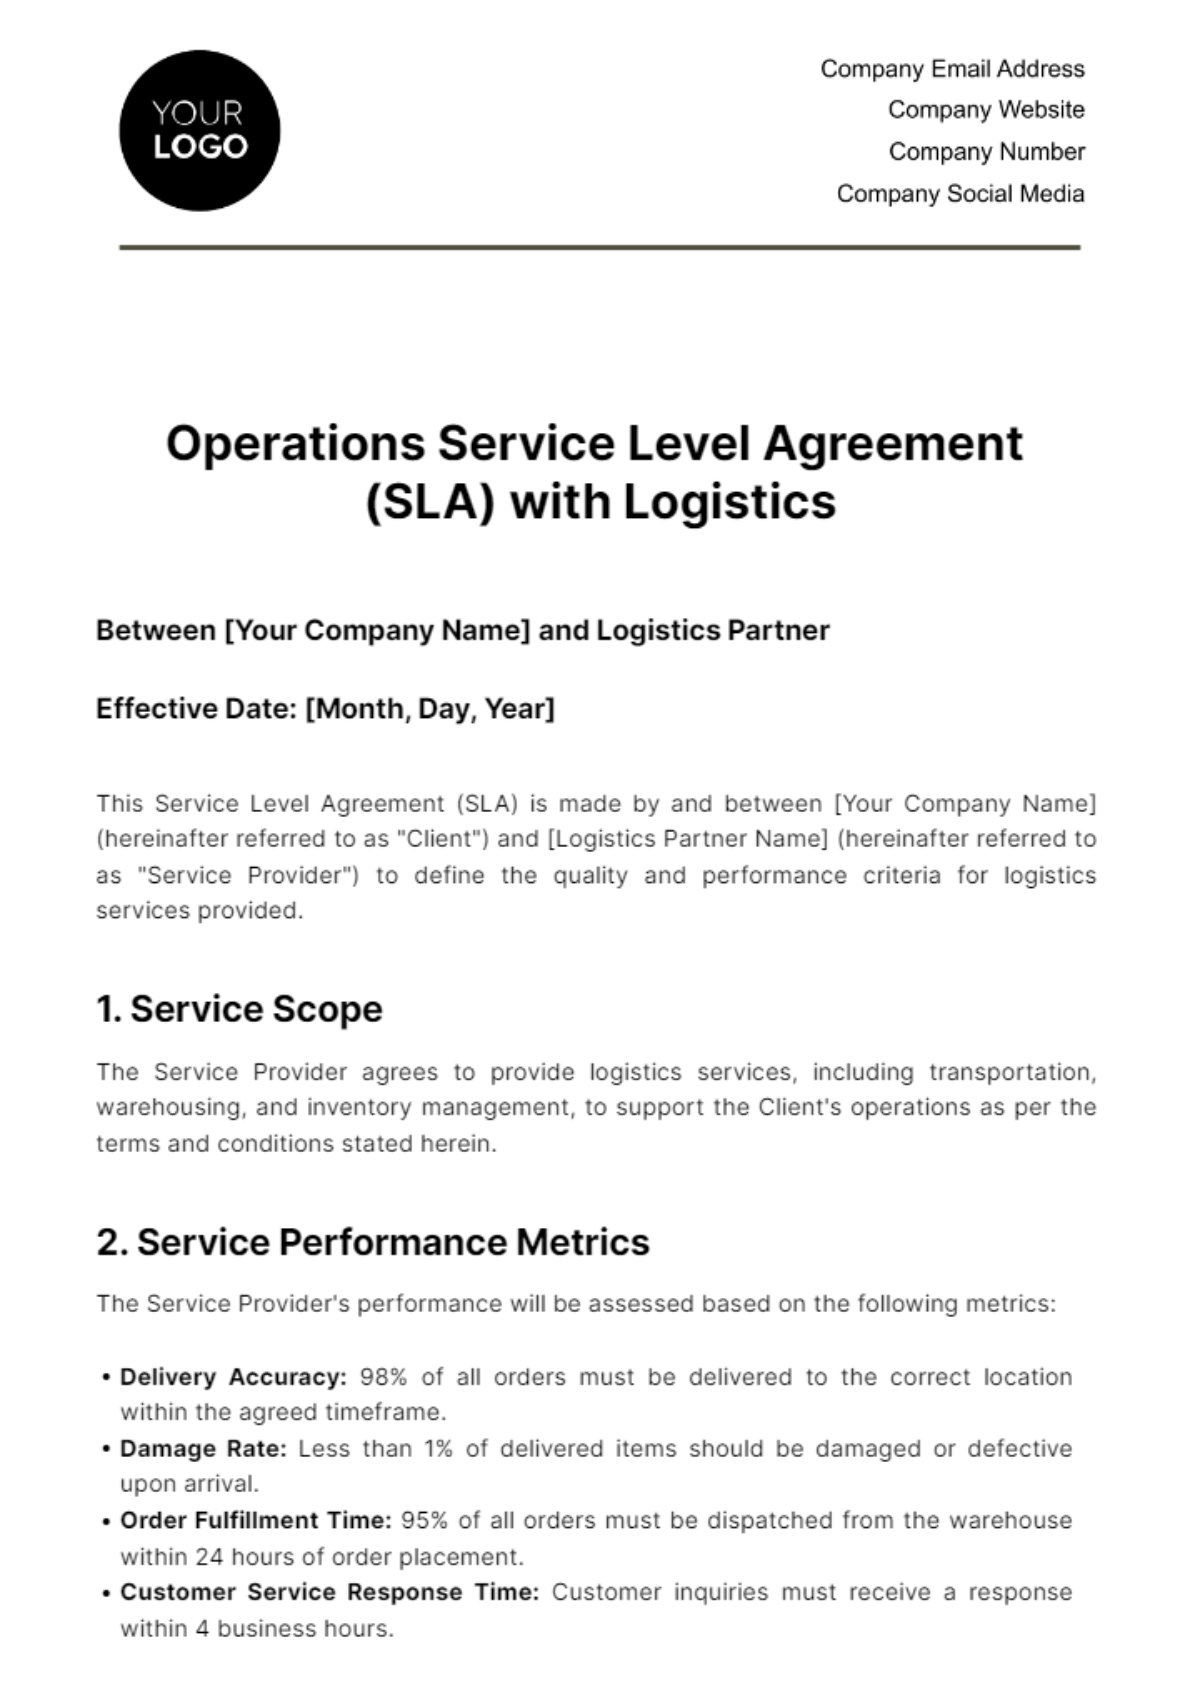 Free Operations Service Level Agreement (SLA) with Logistics Template